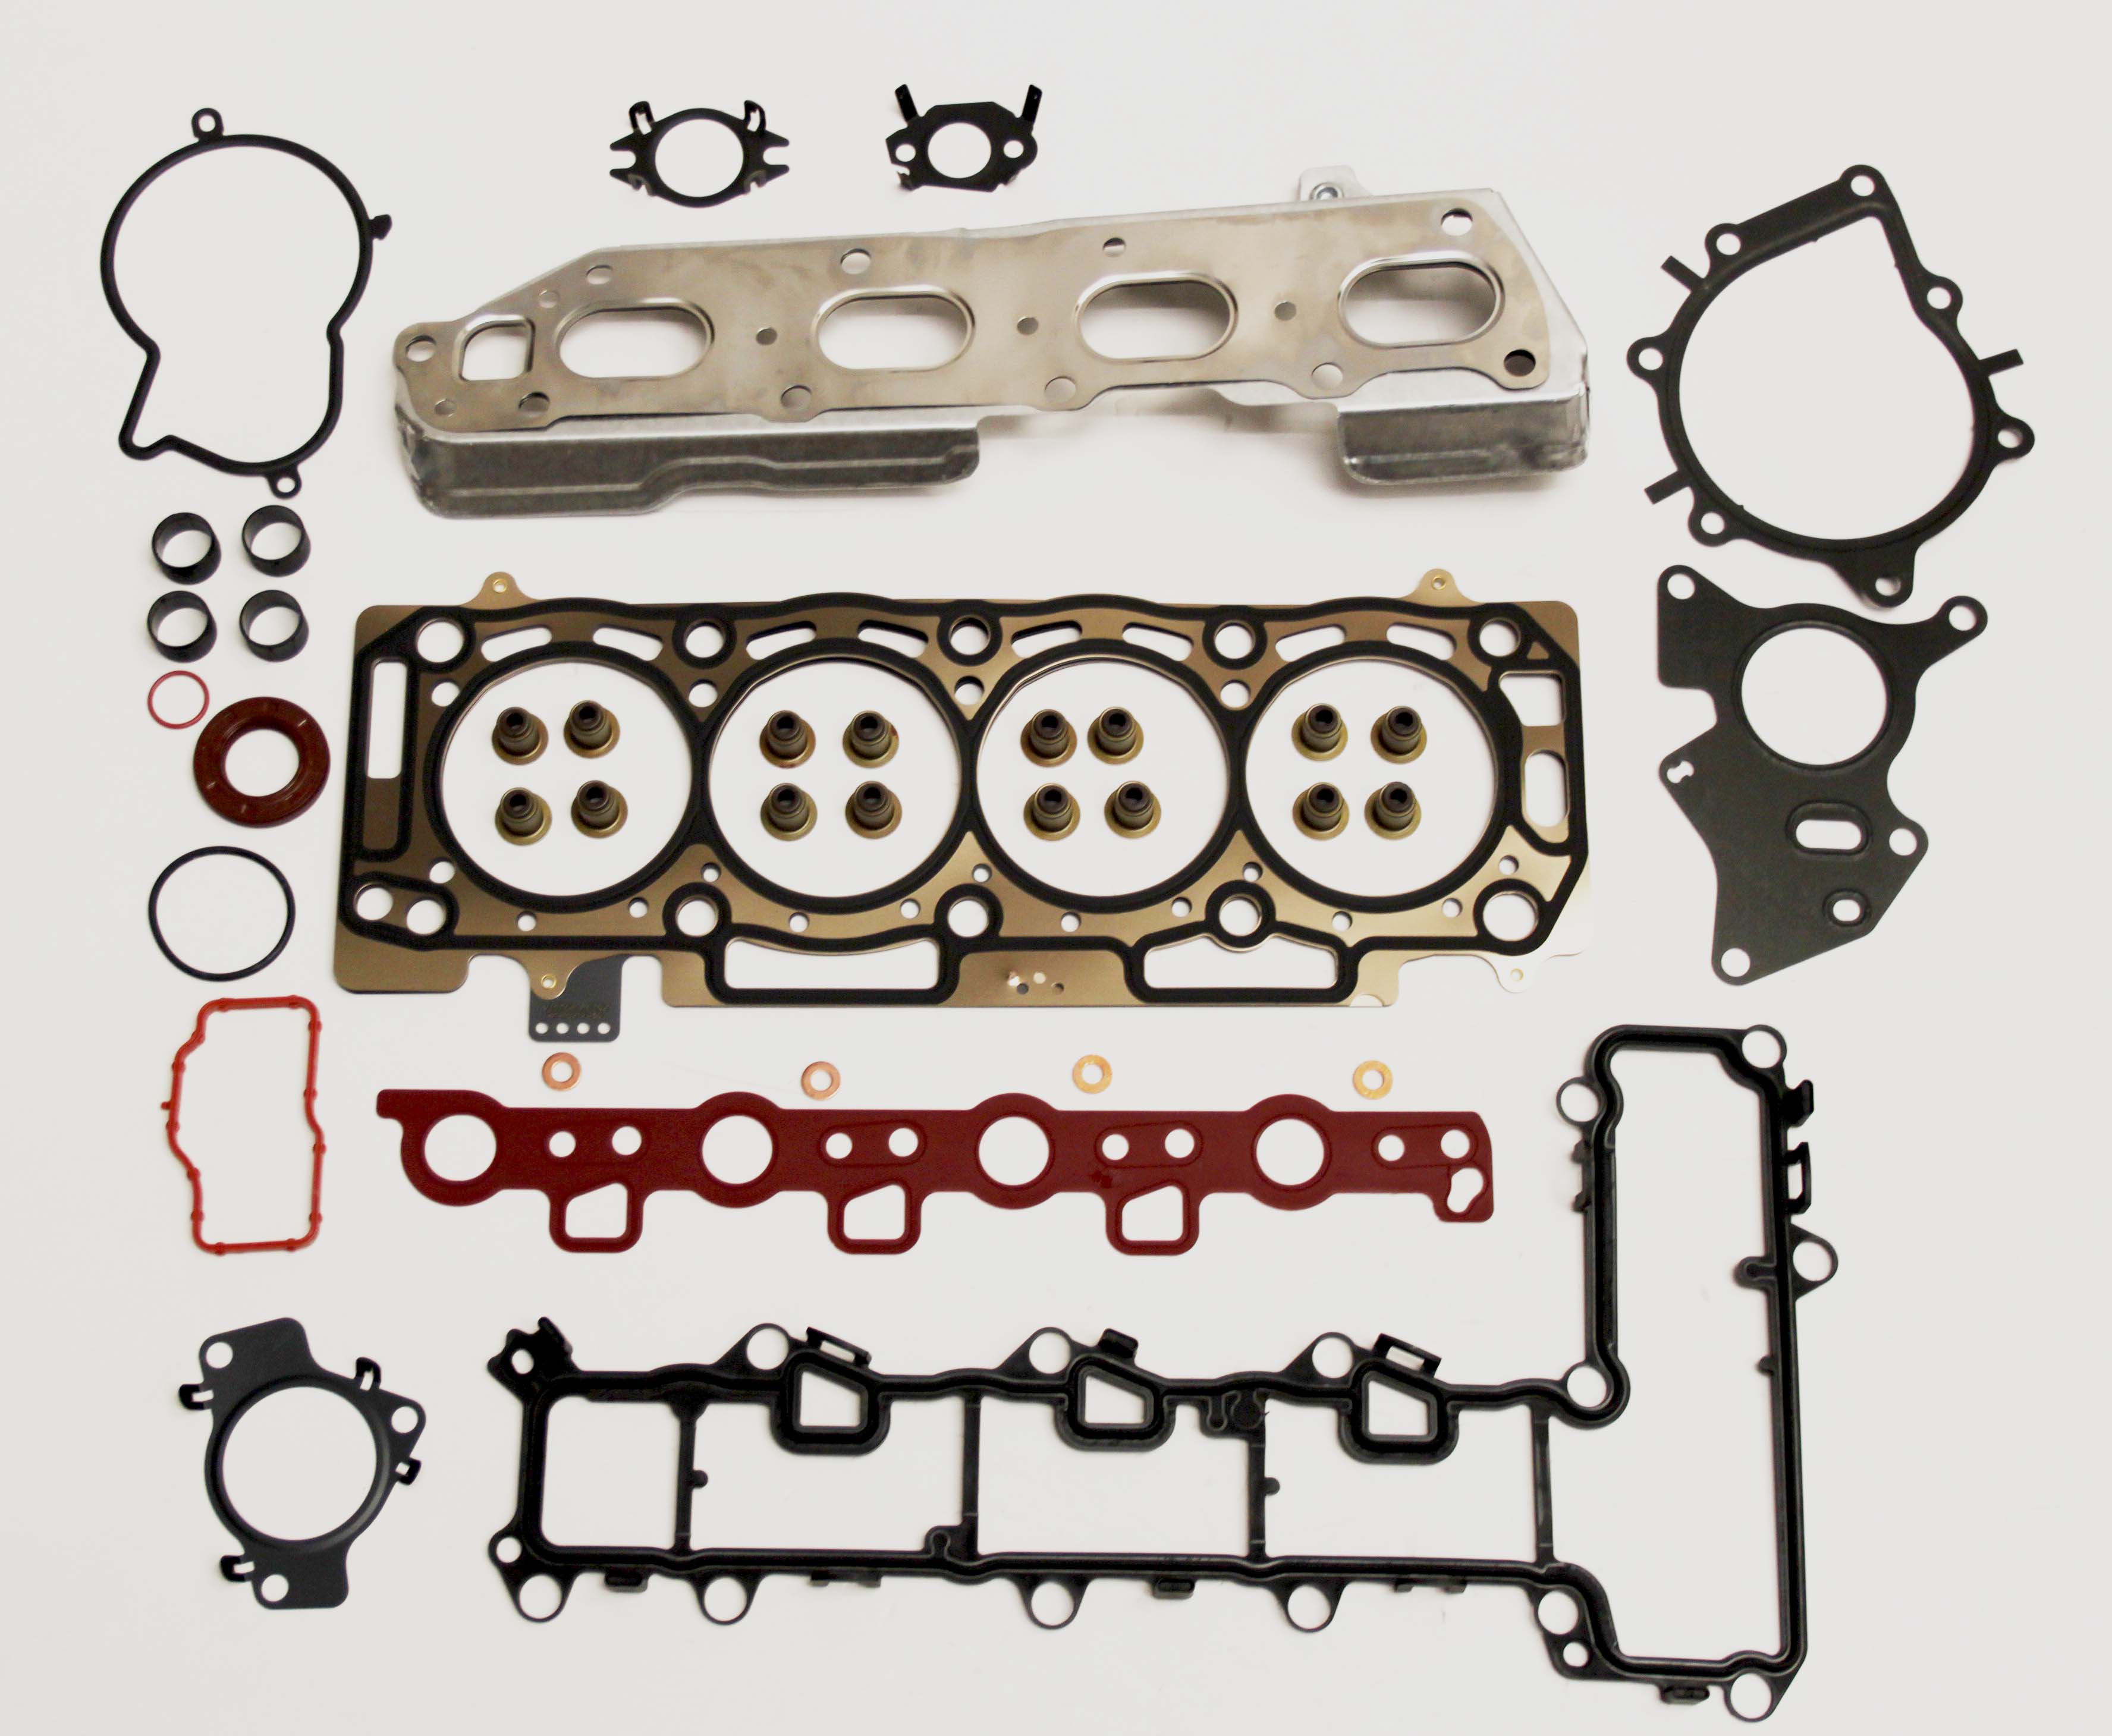 Cylinder Head Gasket Set For Ford C-Max, Focus, Galaxy, Kuga, Mondeo,  S-Max​ 2.0 TDCi